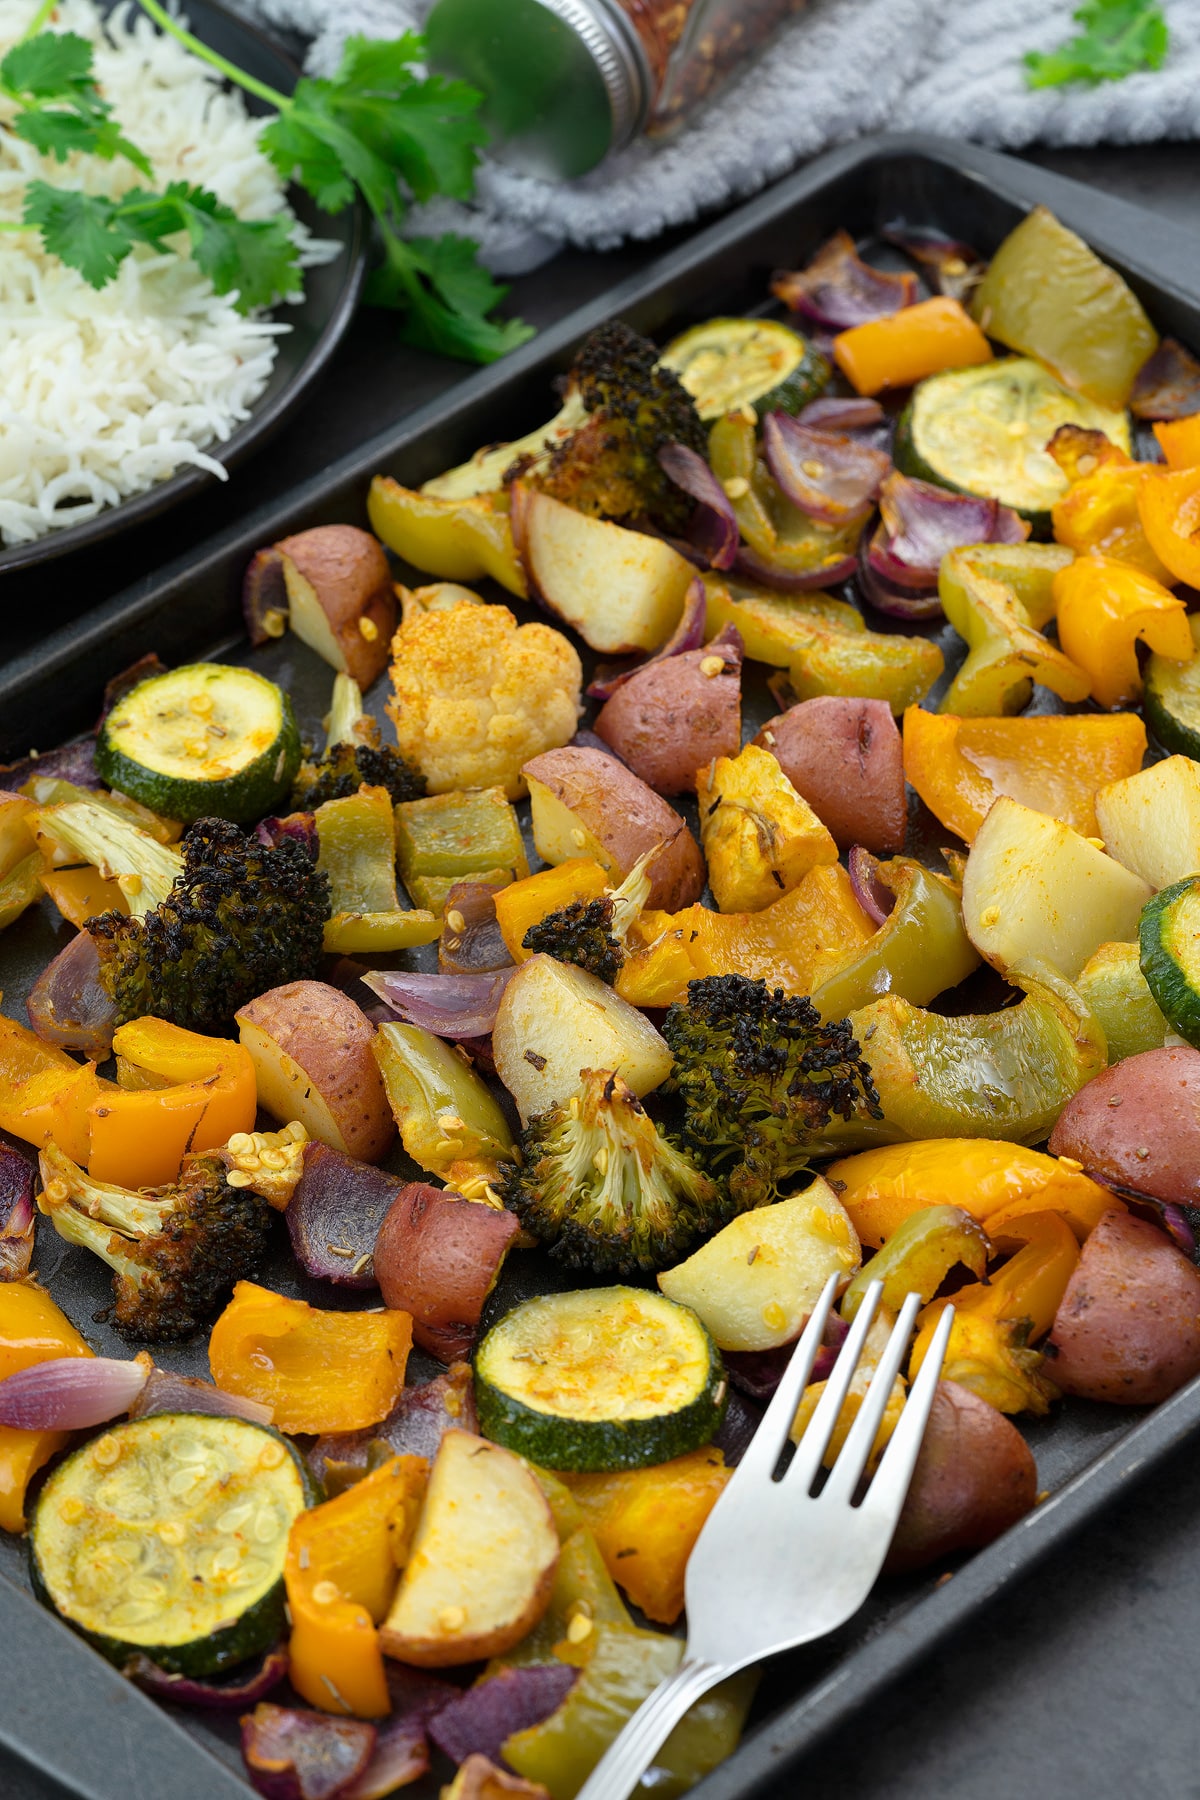 Oven roasted vegetables in a baking tray with rice in a plate alongside